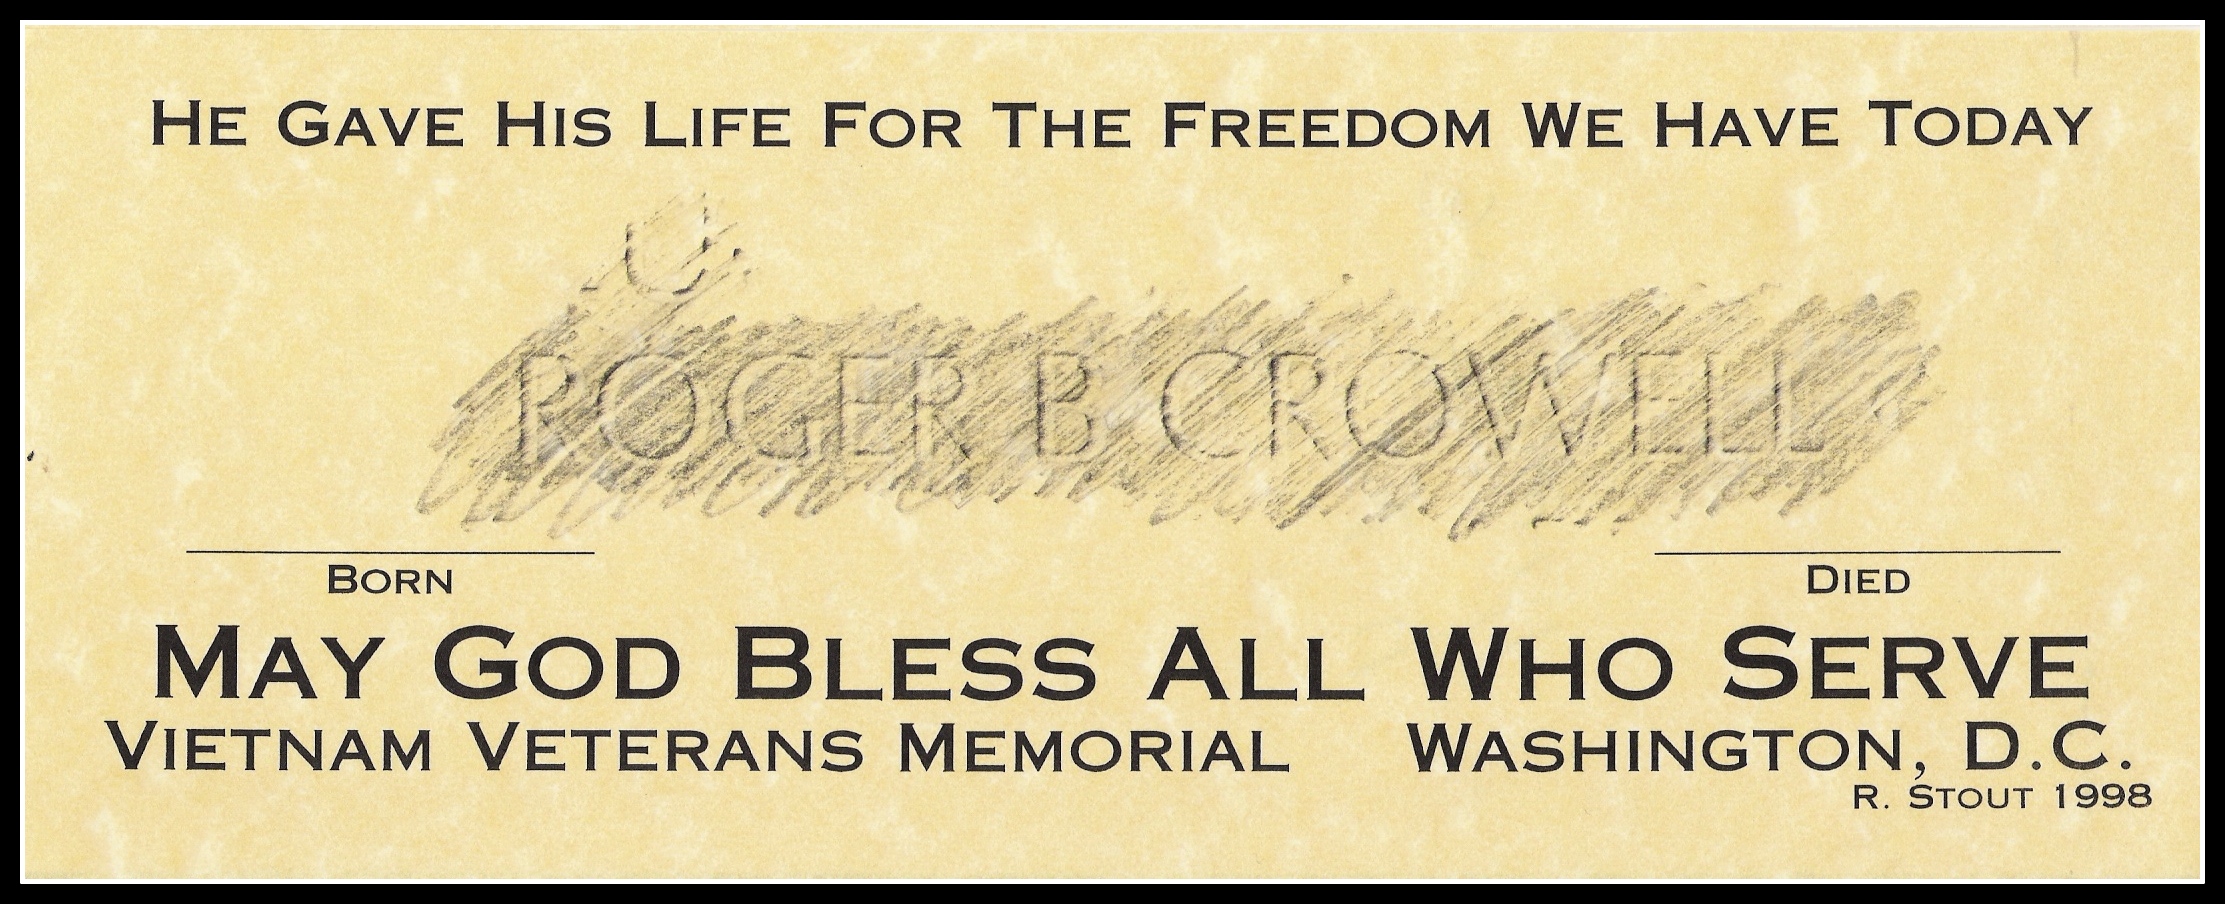 Roger Crowell of Belleville, KIA Vietnam, Copyright  2004 by Anthony Buccino